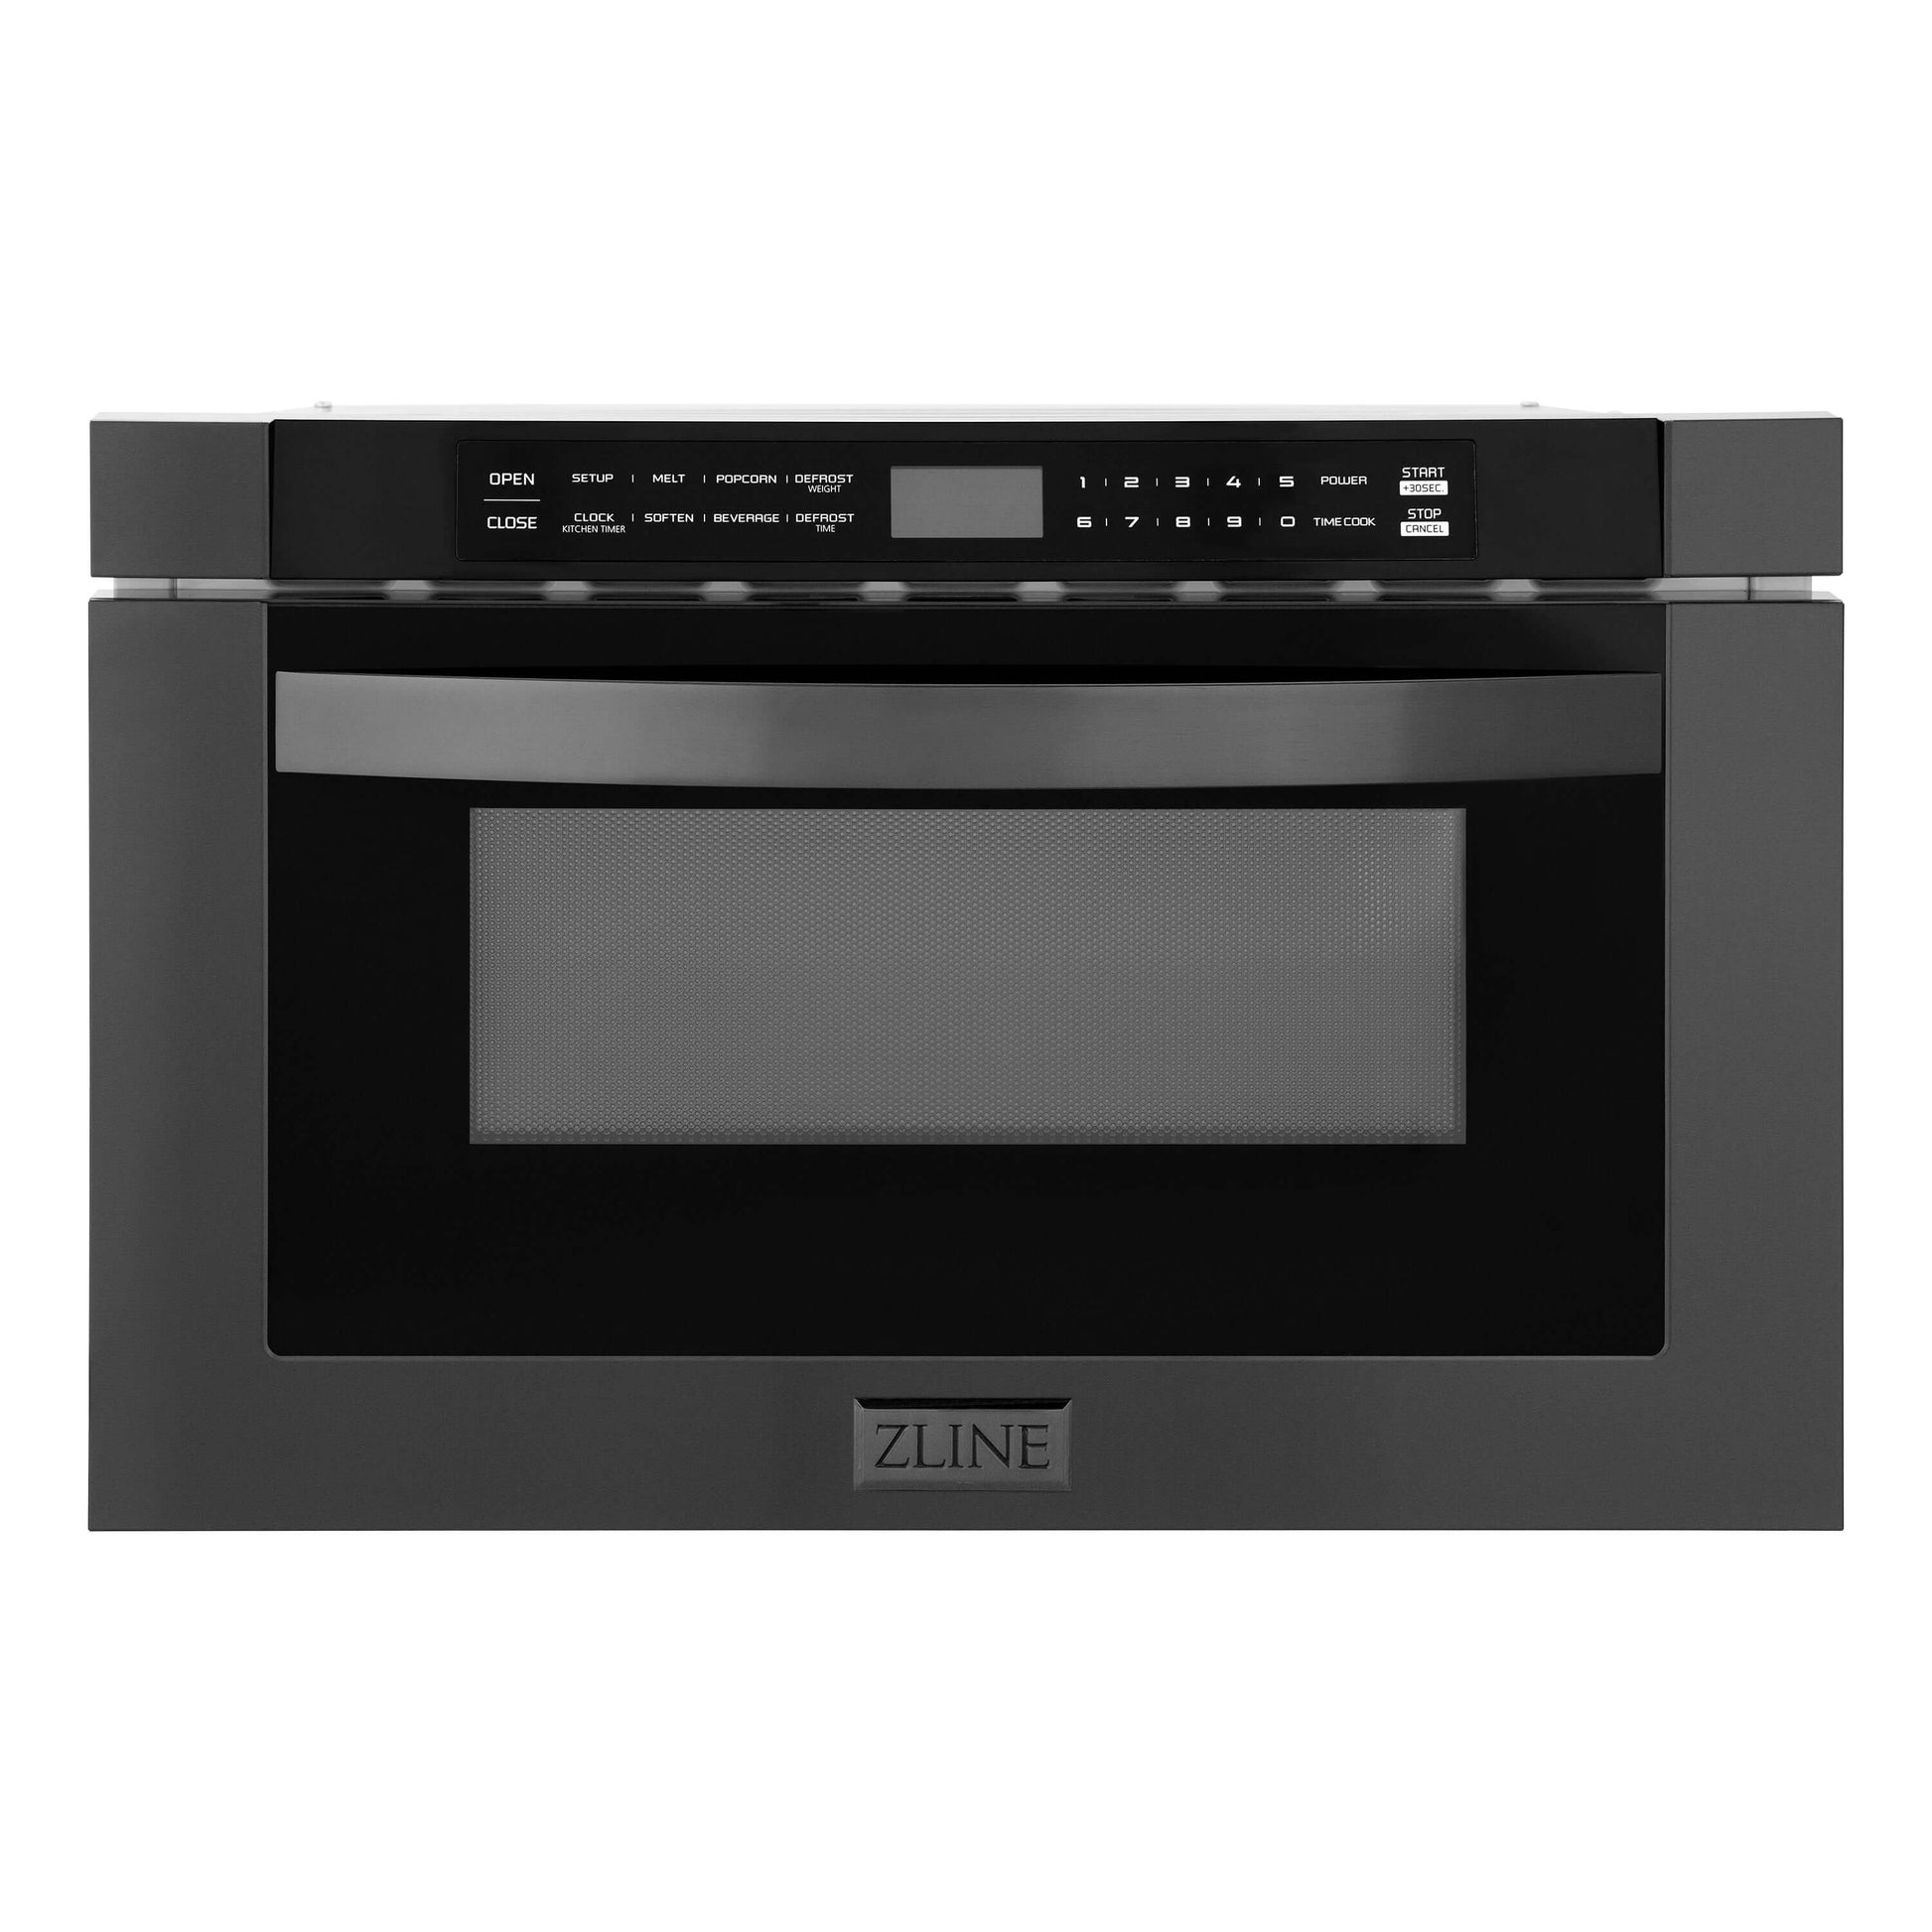 ZLINE 24" Built-in Microwave Drawer with Color Options